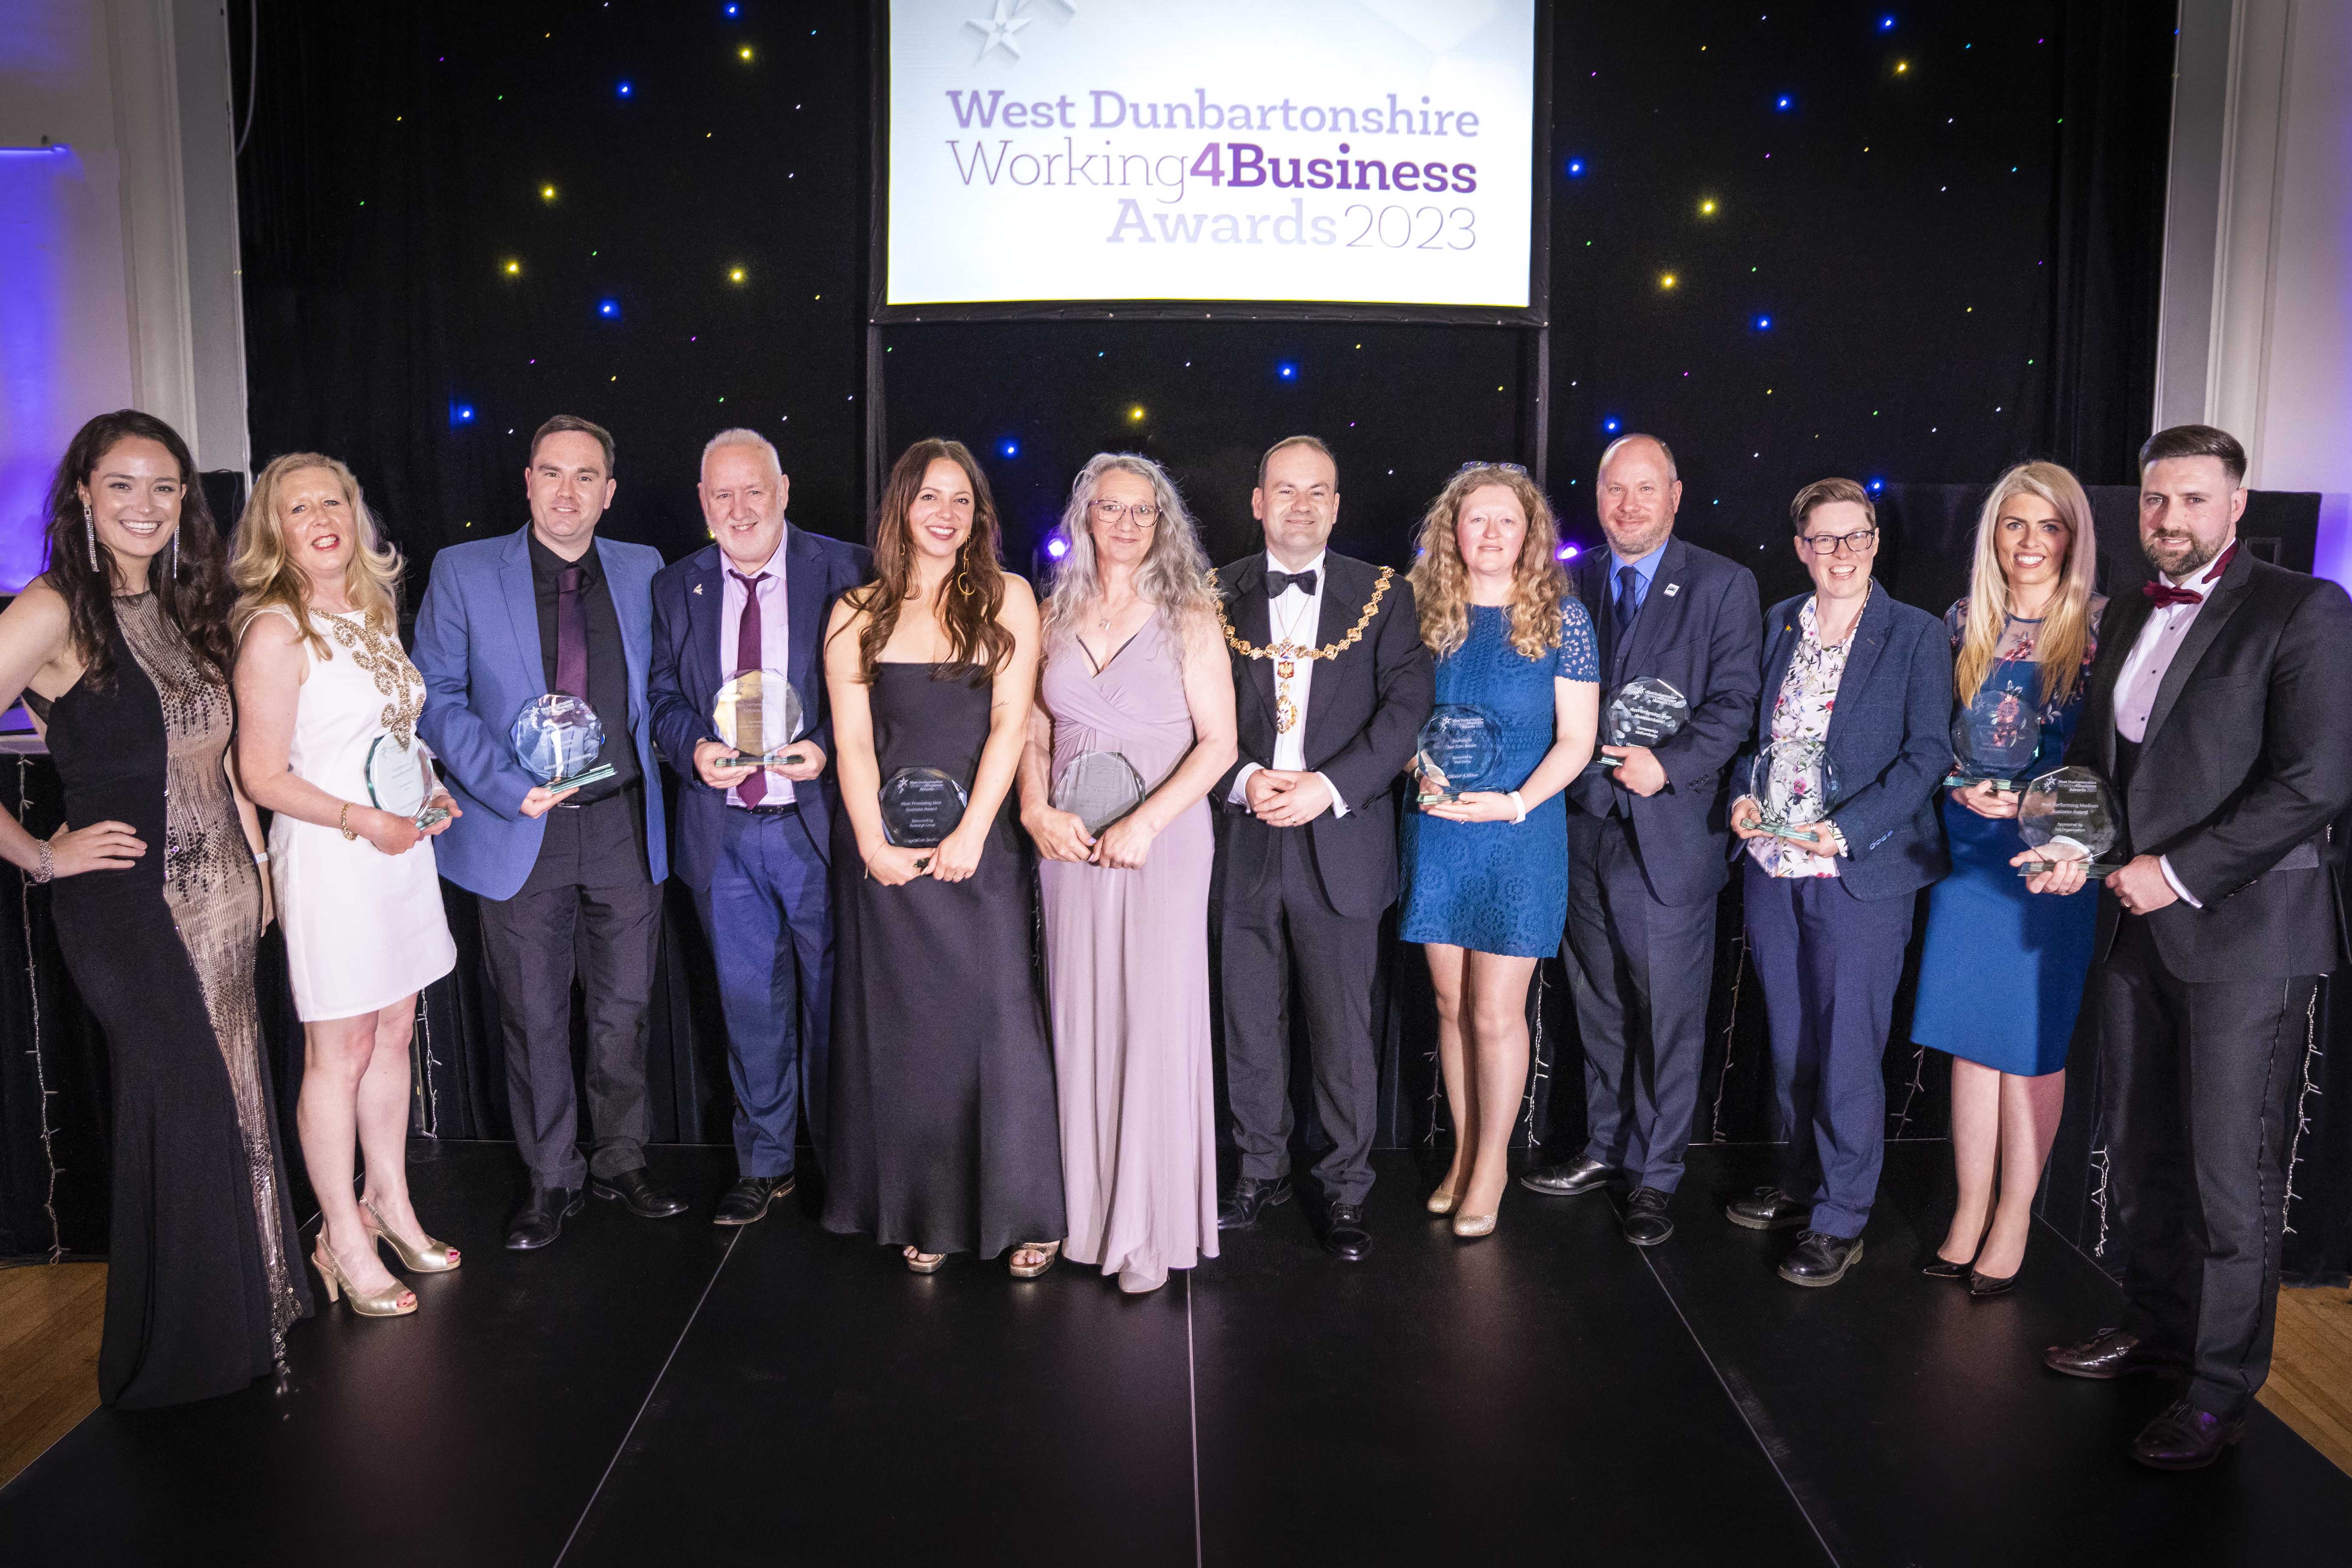 Group winners for working4business awards